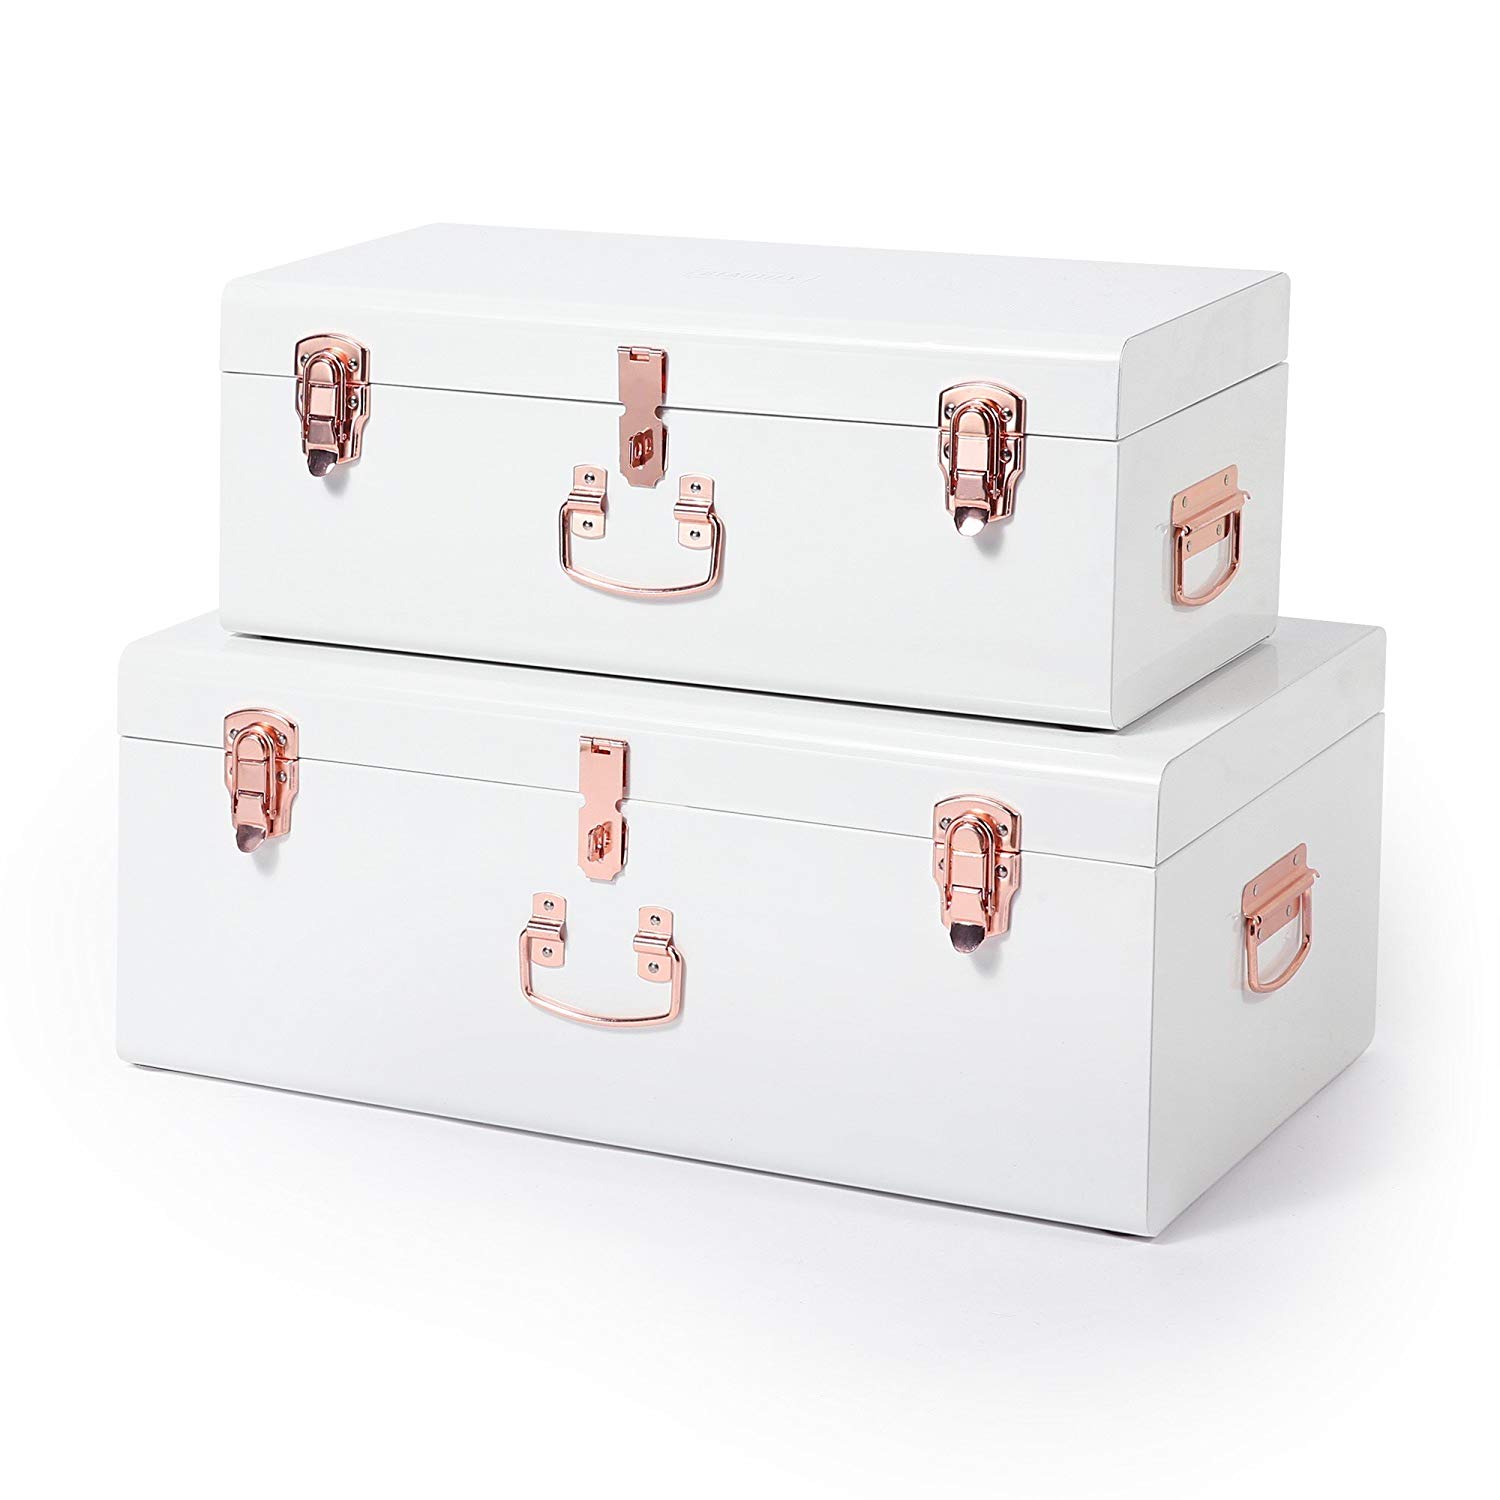 Cream Vintage Style Steel Metal Storage Trunk Set with Rose Gold Handles on Amazon